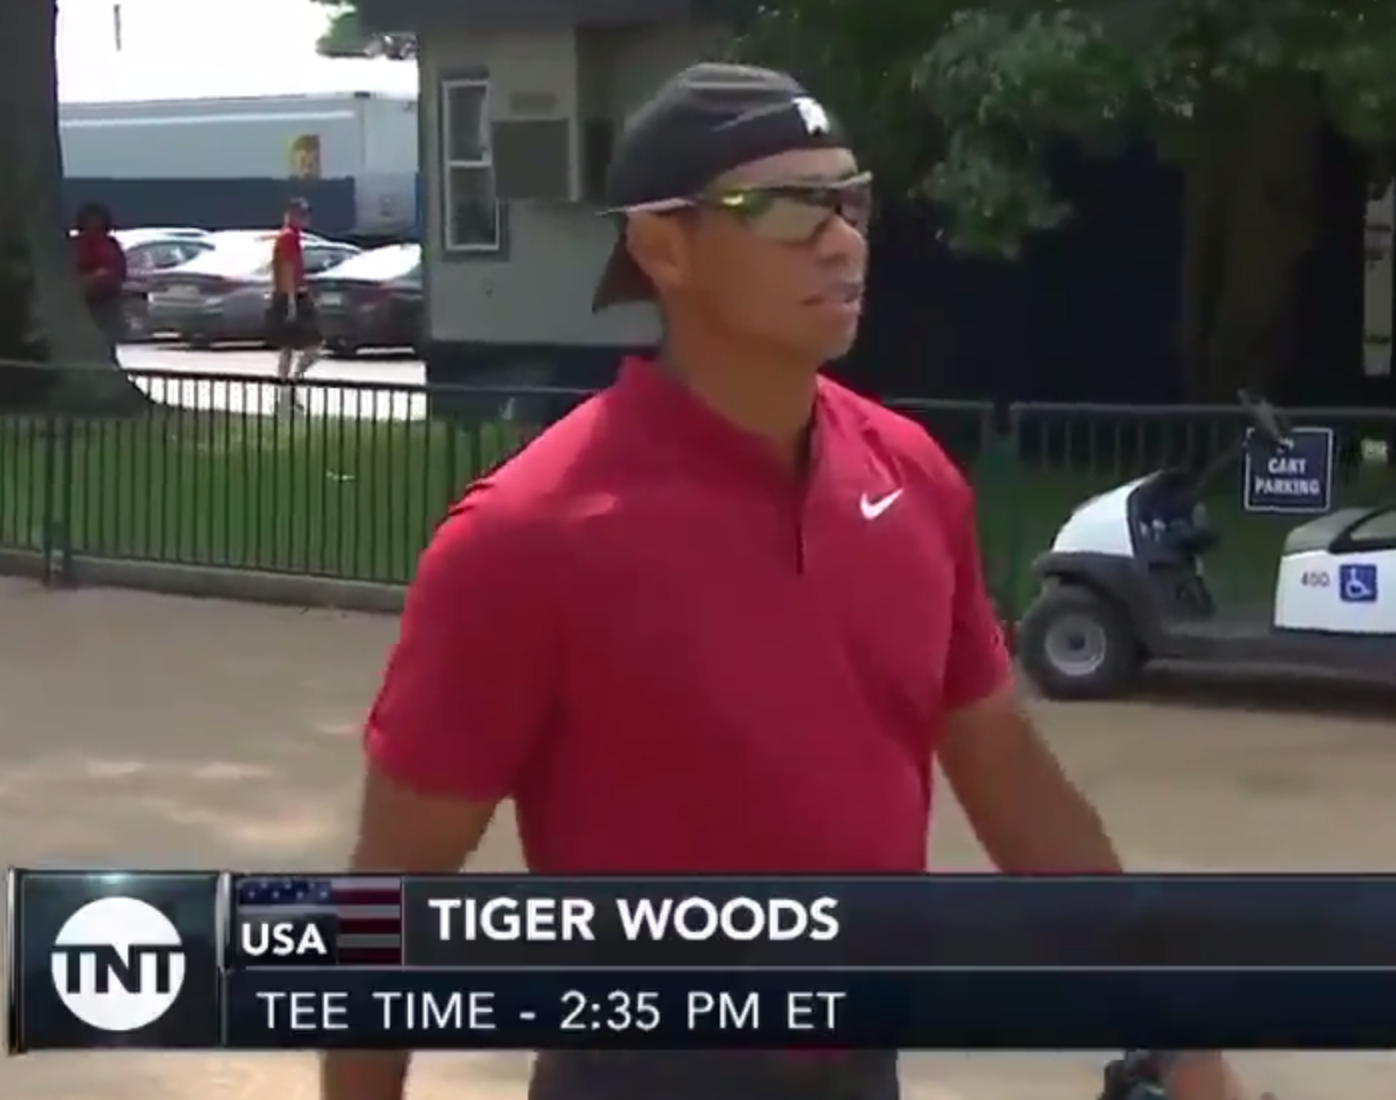 Pga Championship 2018 Tiger Arrives At Bellerive Like A Boss Twitter Reacts Accordingly This Is The Loop Golf Digest